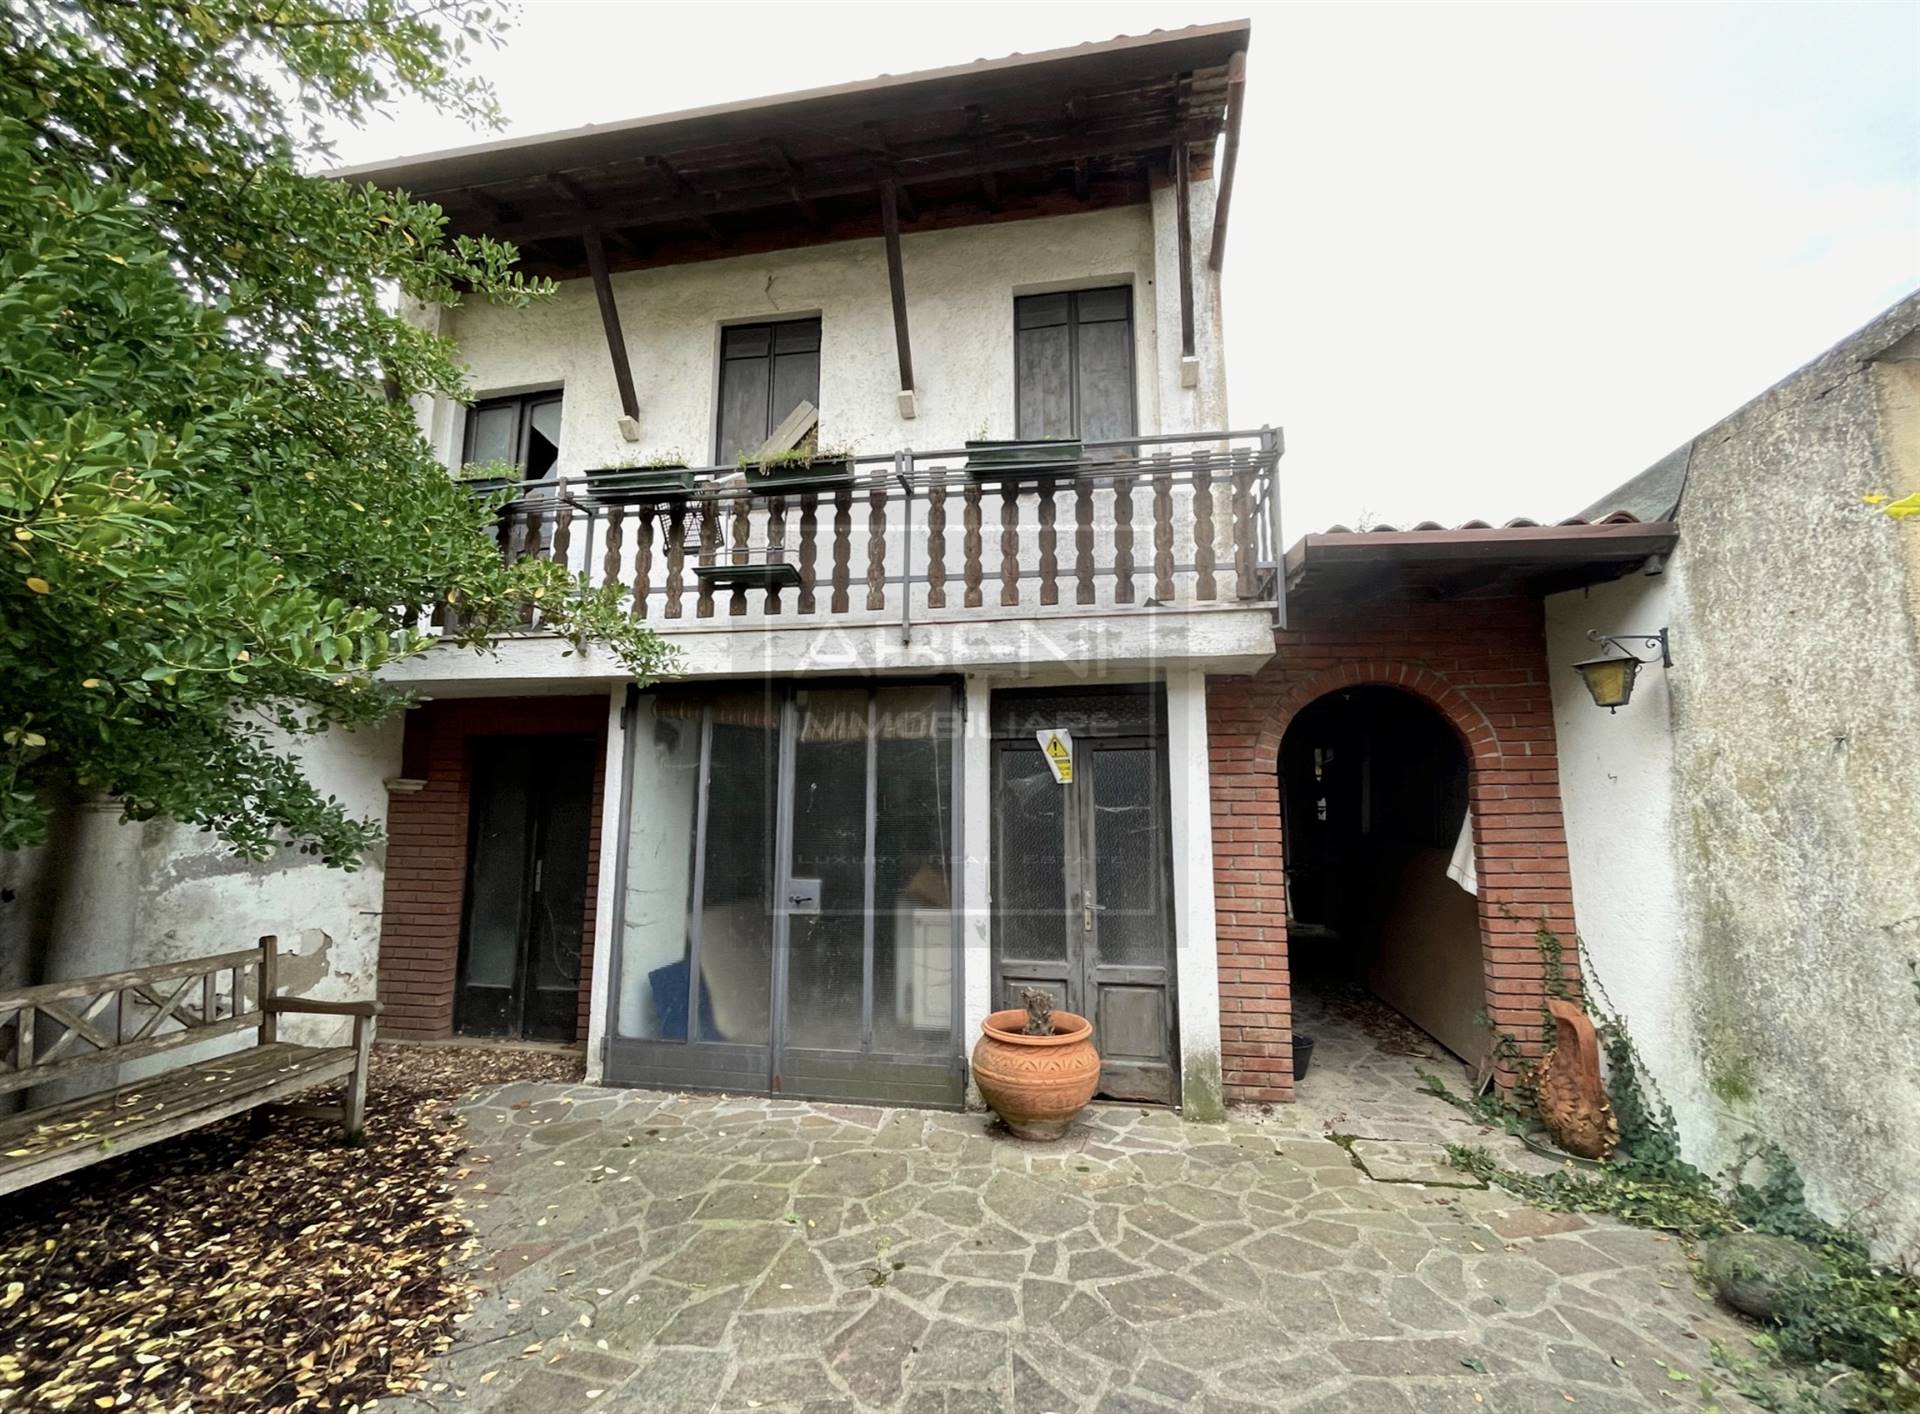 BEDIZZOLE, Rustic farmhouse for sale of 250 Sq. mt., Be restored, Energetic class: G, composed by: 10 Rooms, Separate kitchen, , 4 Bedrooms, 3 